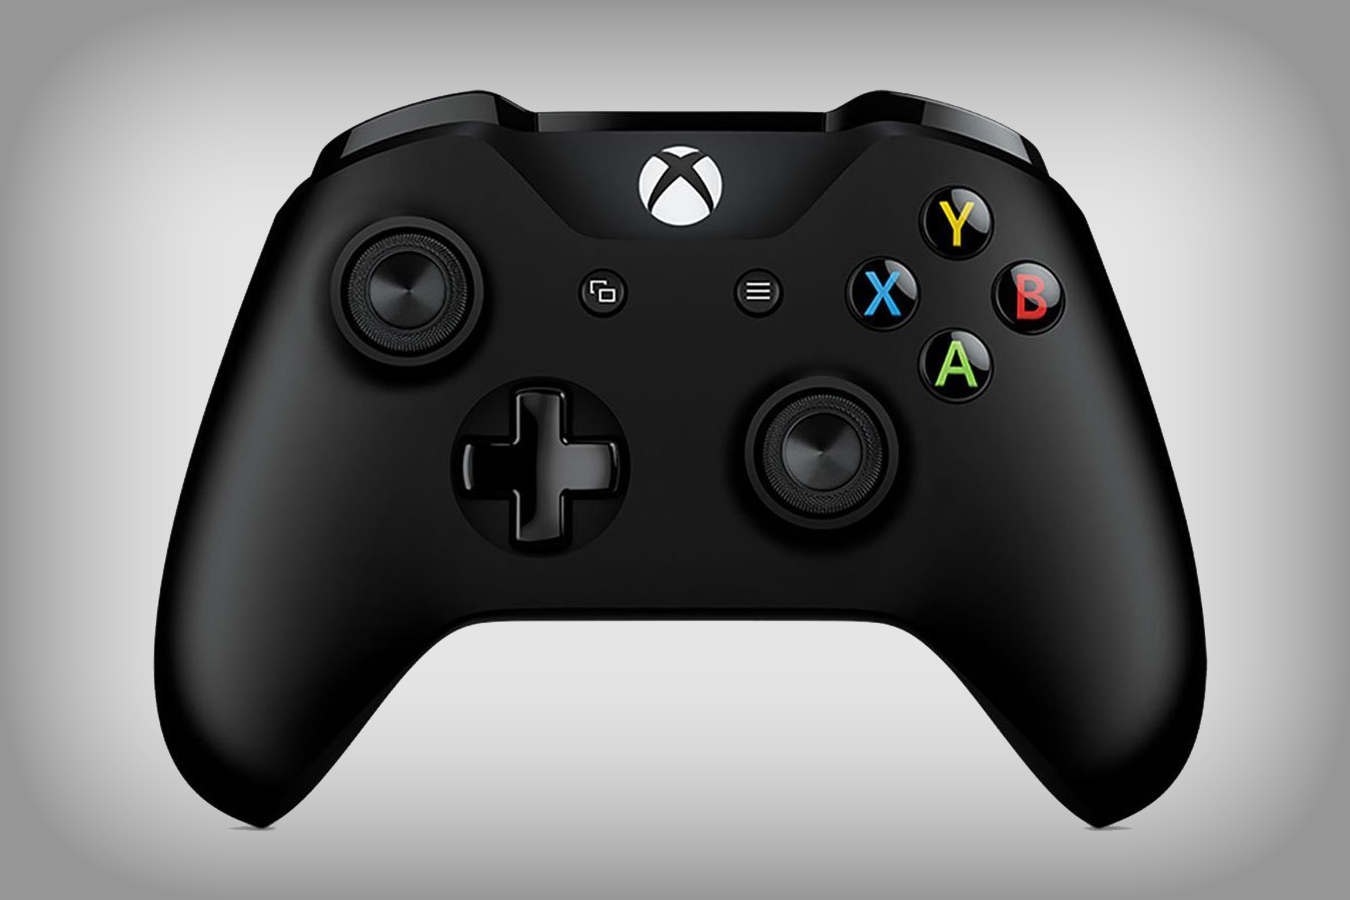  How to connect an Xbox One controller to a PC